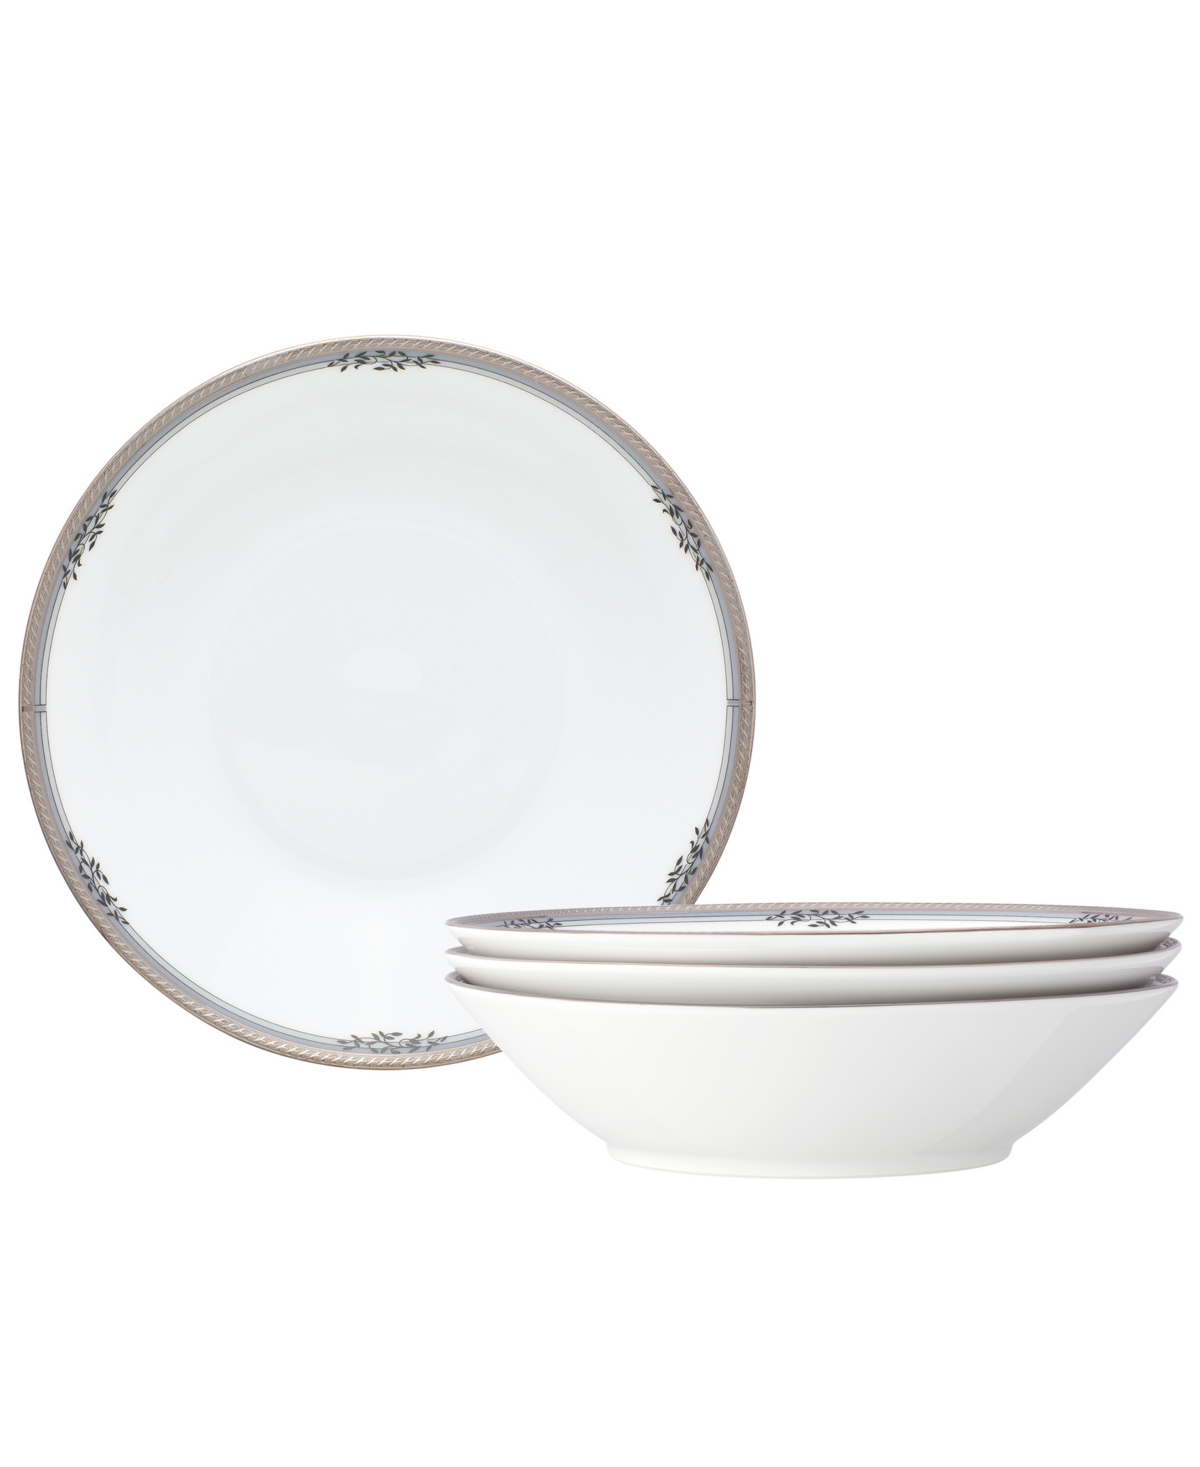 Noritake Laurelvale 4 Piece Soup Bowl Set, Service For 4 In White